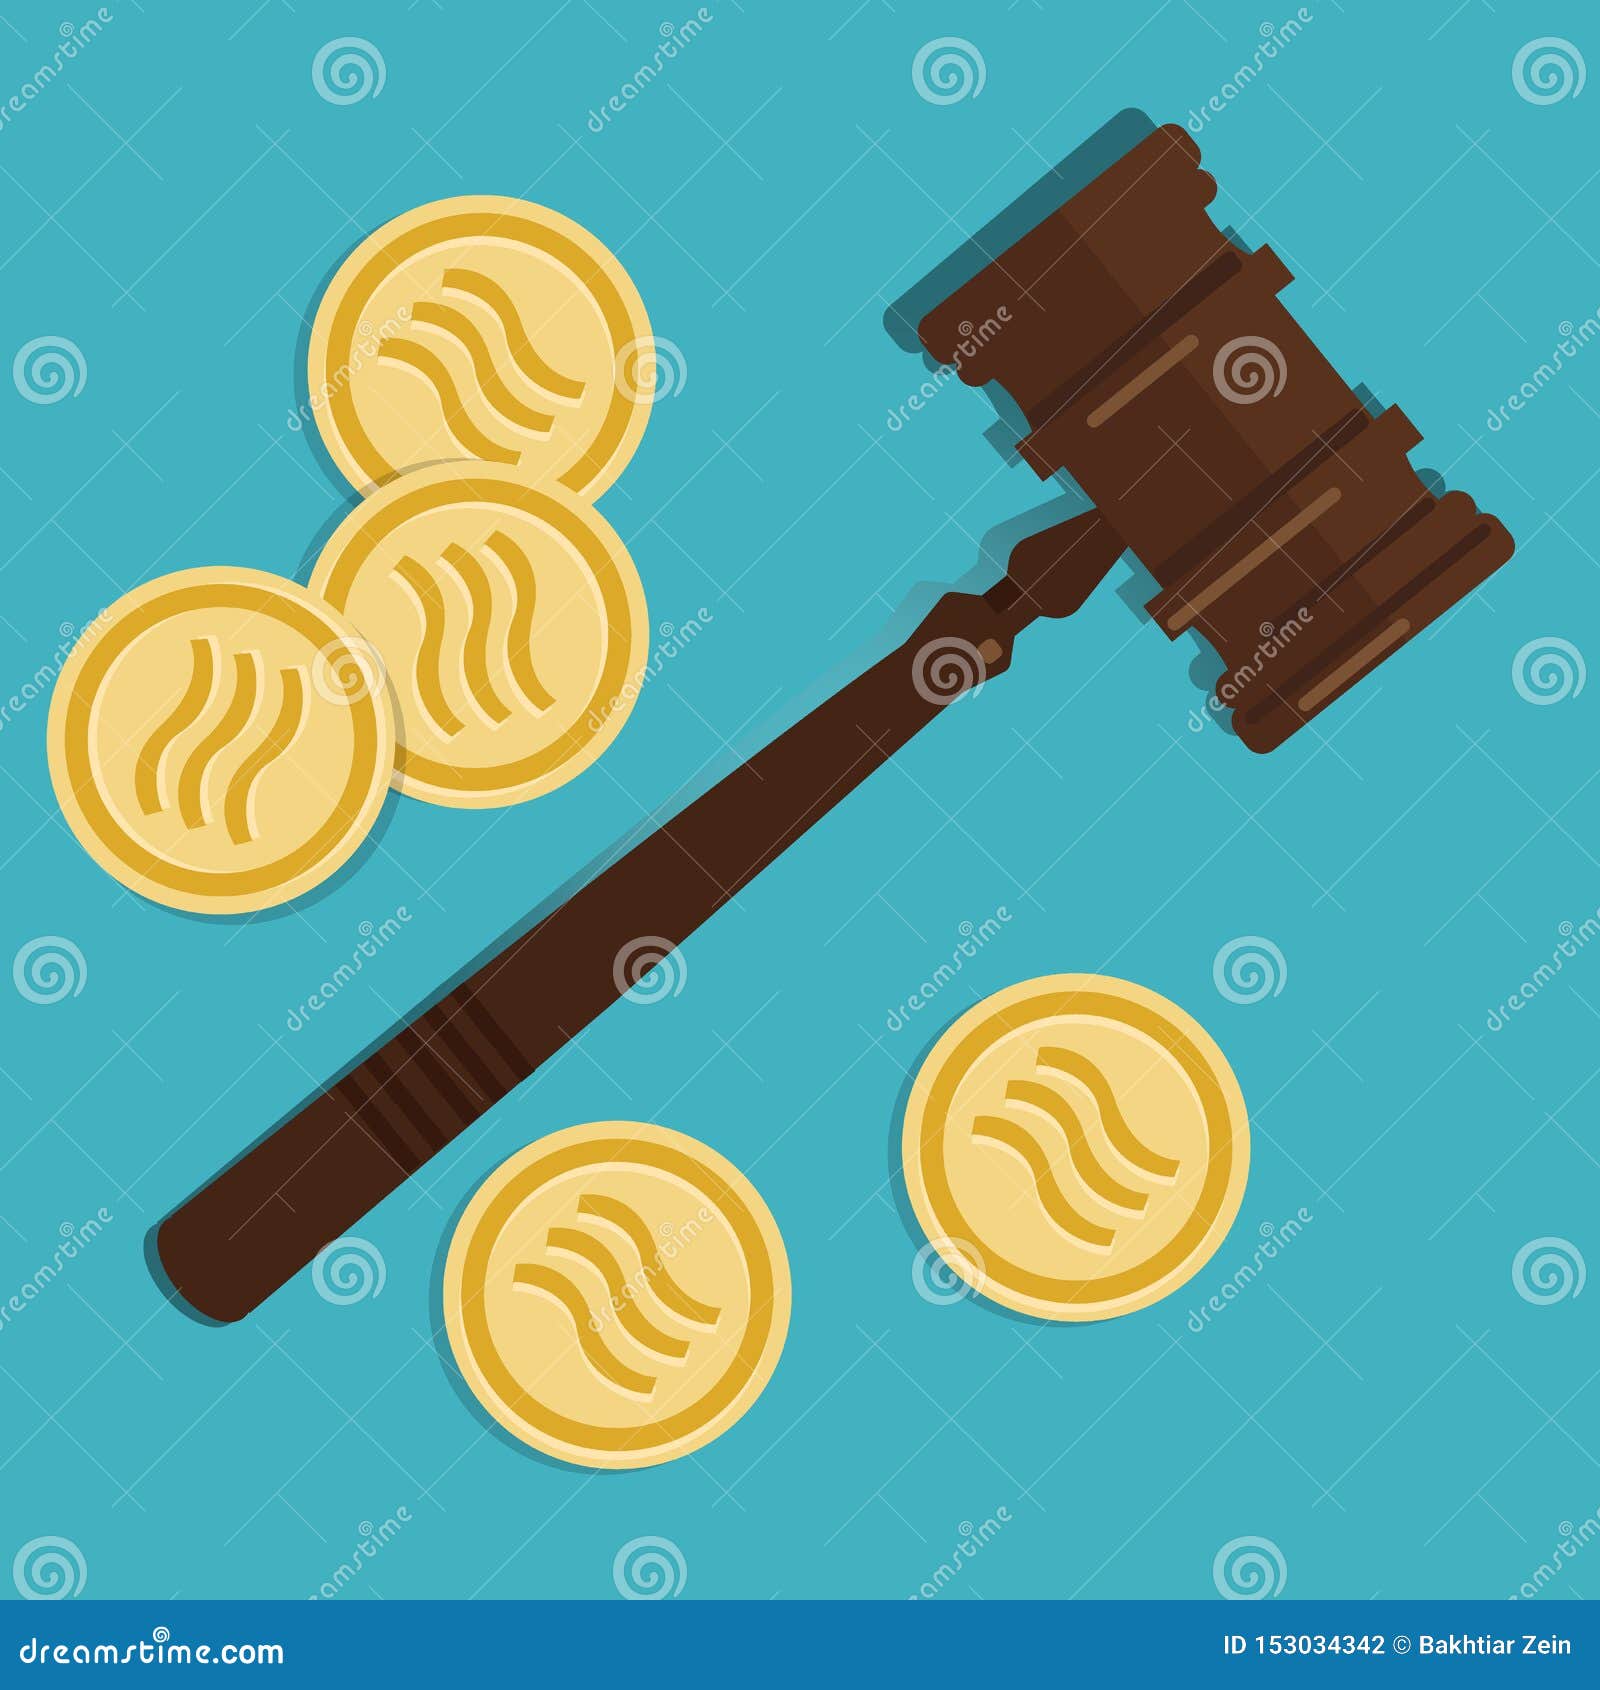 crypto currency law firms